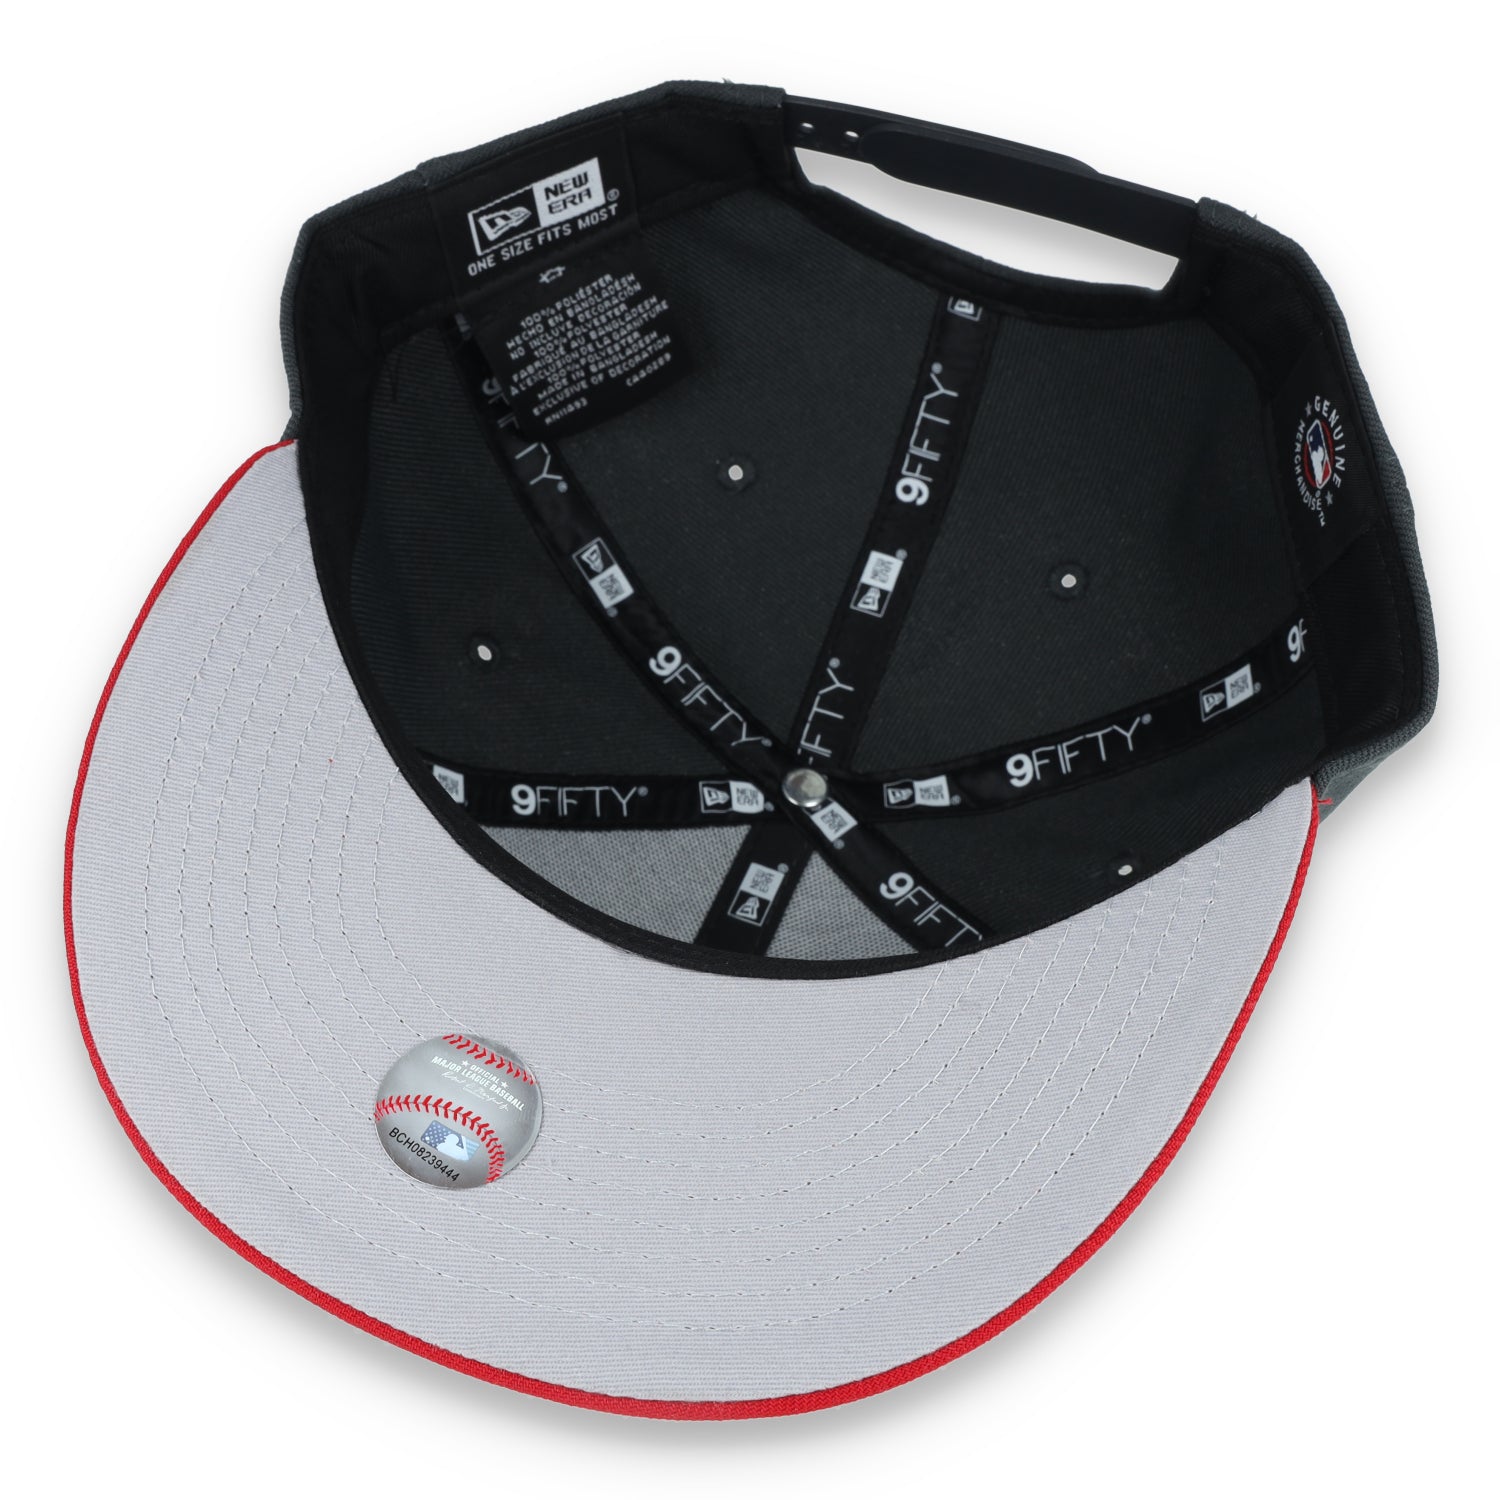 New Era Seattle Mariners 2-Tone Color Pack 9FIFTY Snapback Hat-Grey/Scarlet